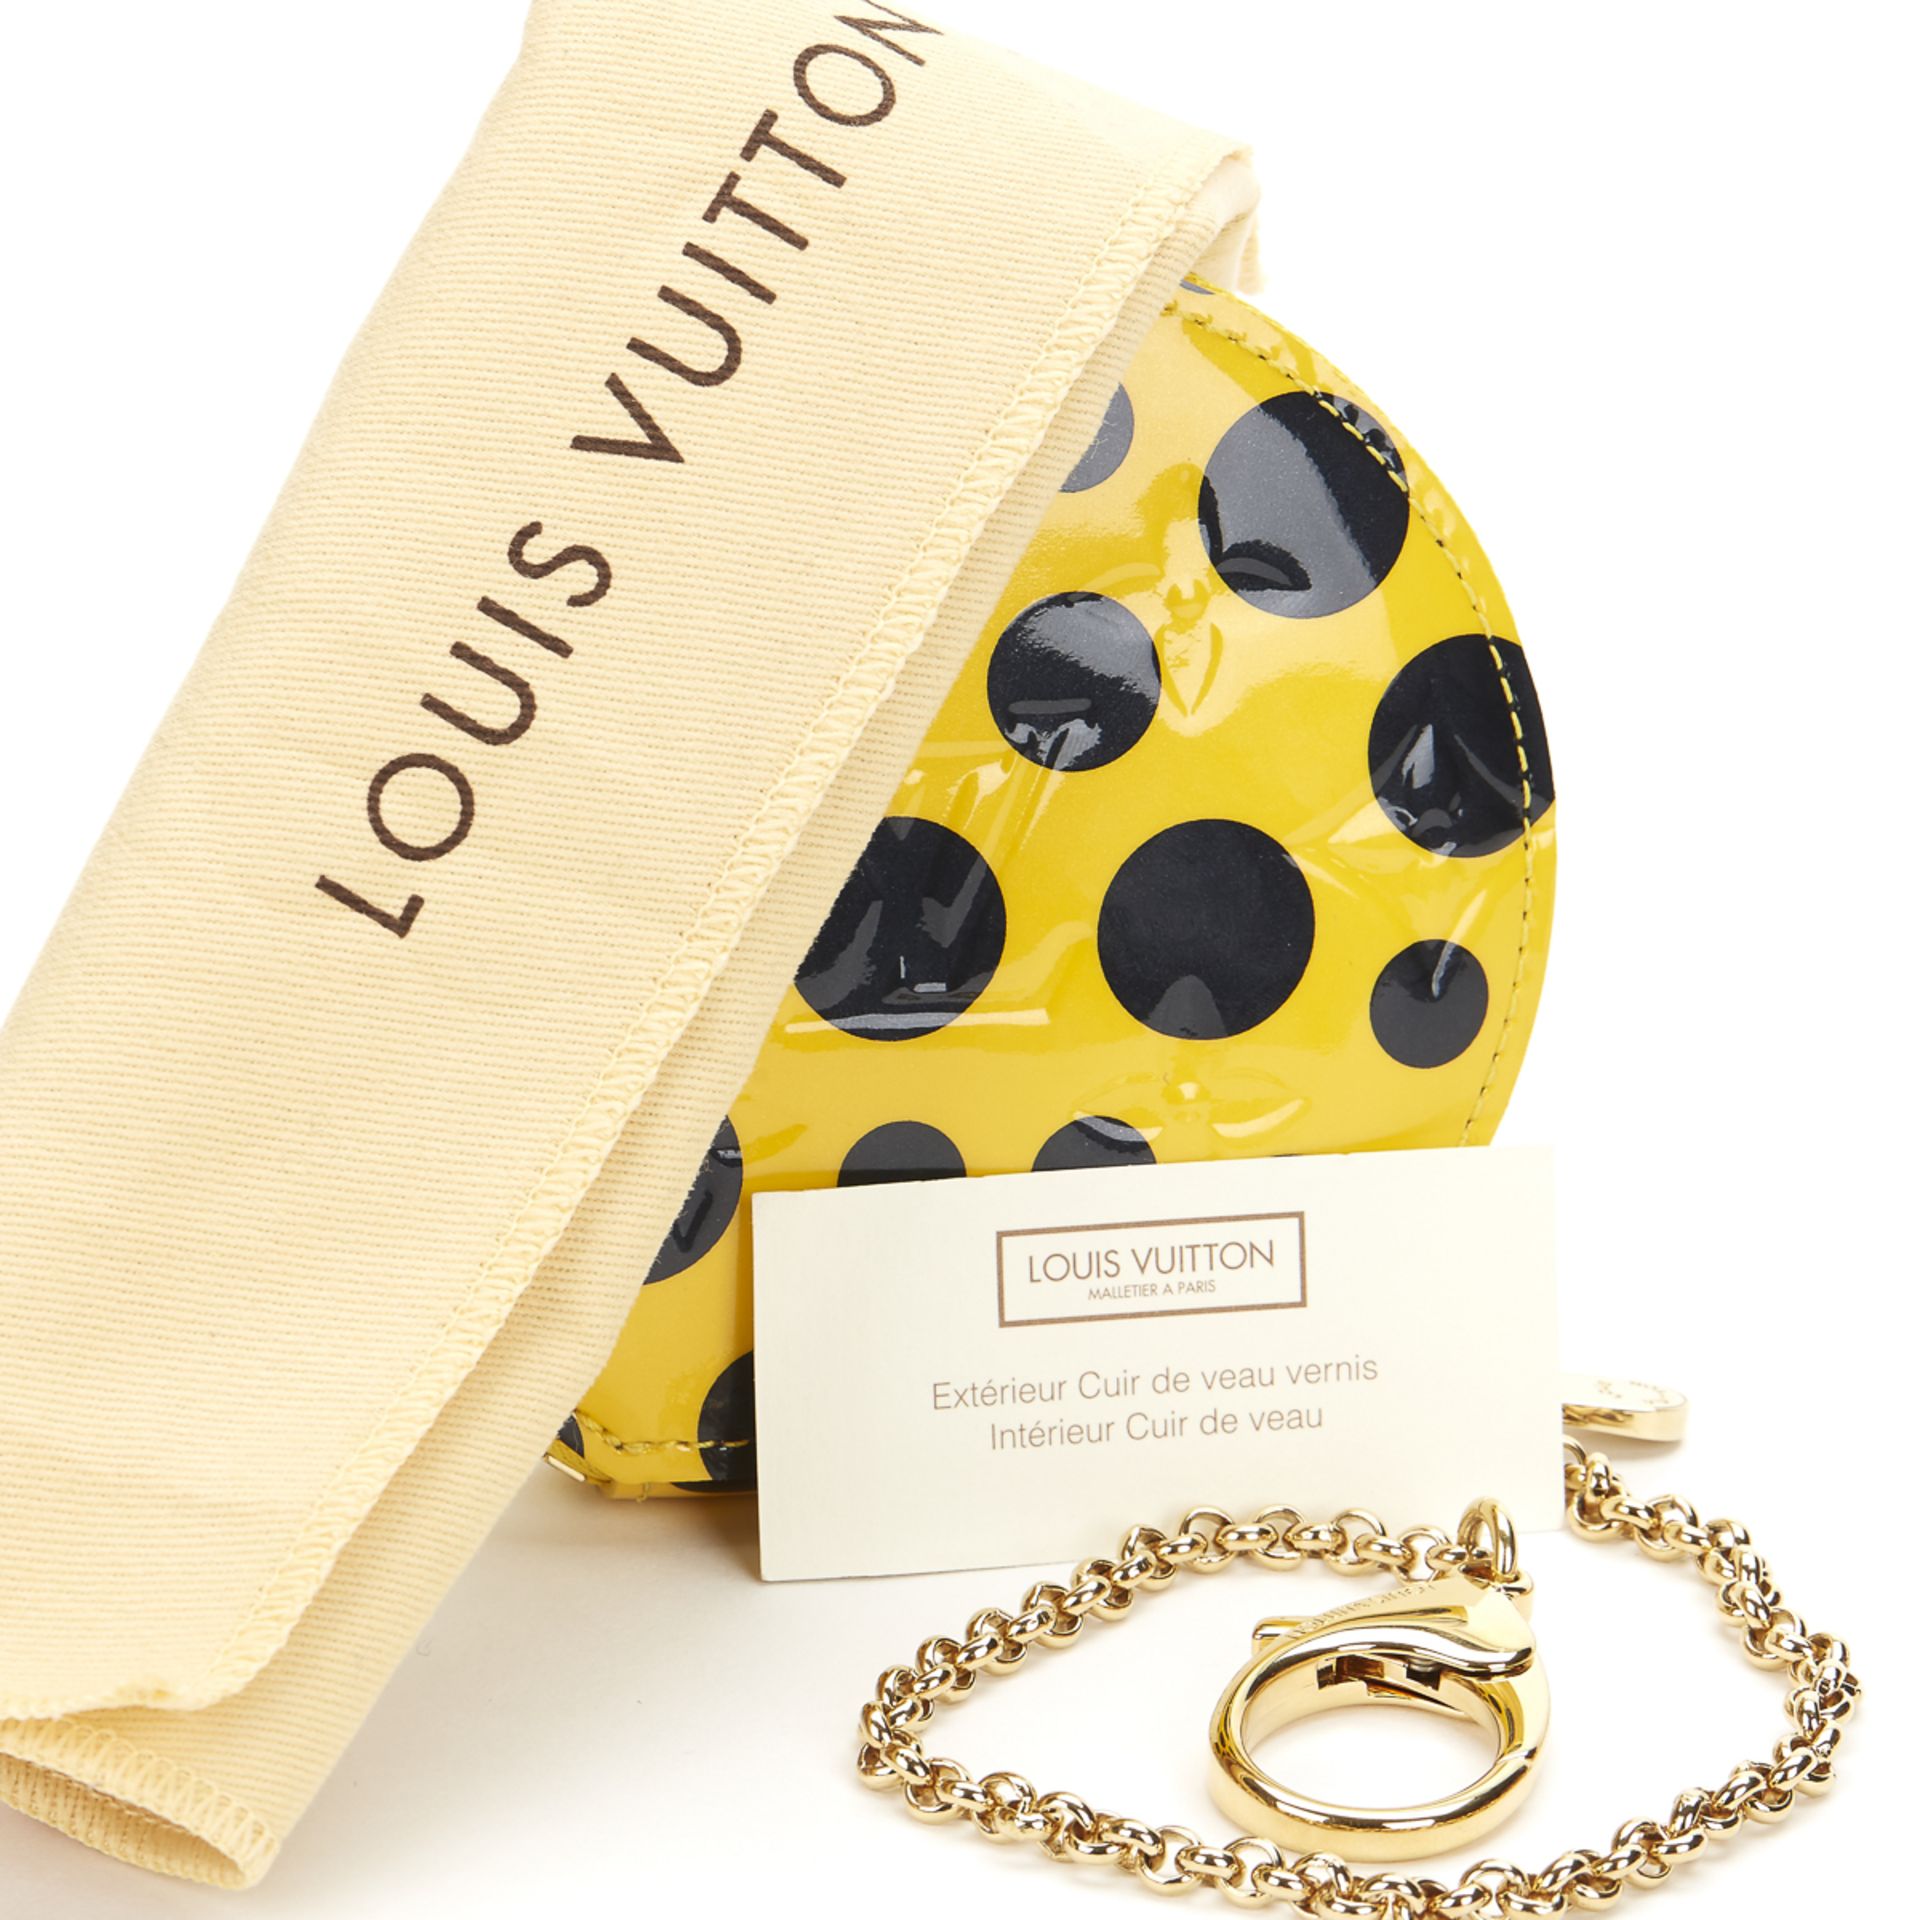 Louis Vuitton Vernis Leather Dots Infinity Juane Yayoi Kusama Round Coin Purse - Image 8 of 8